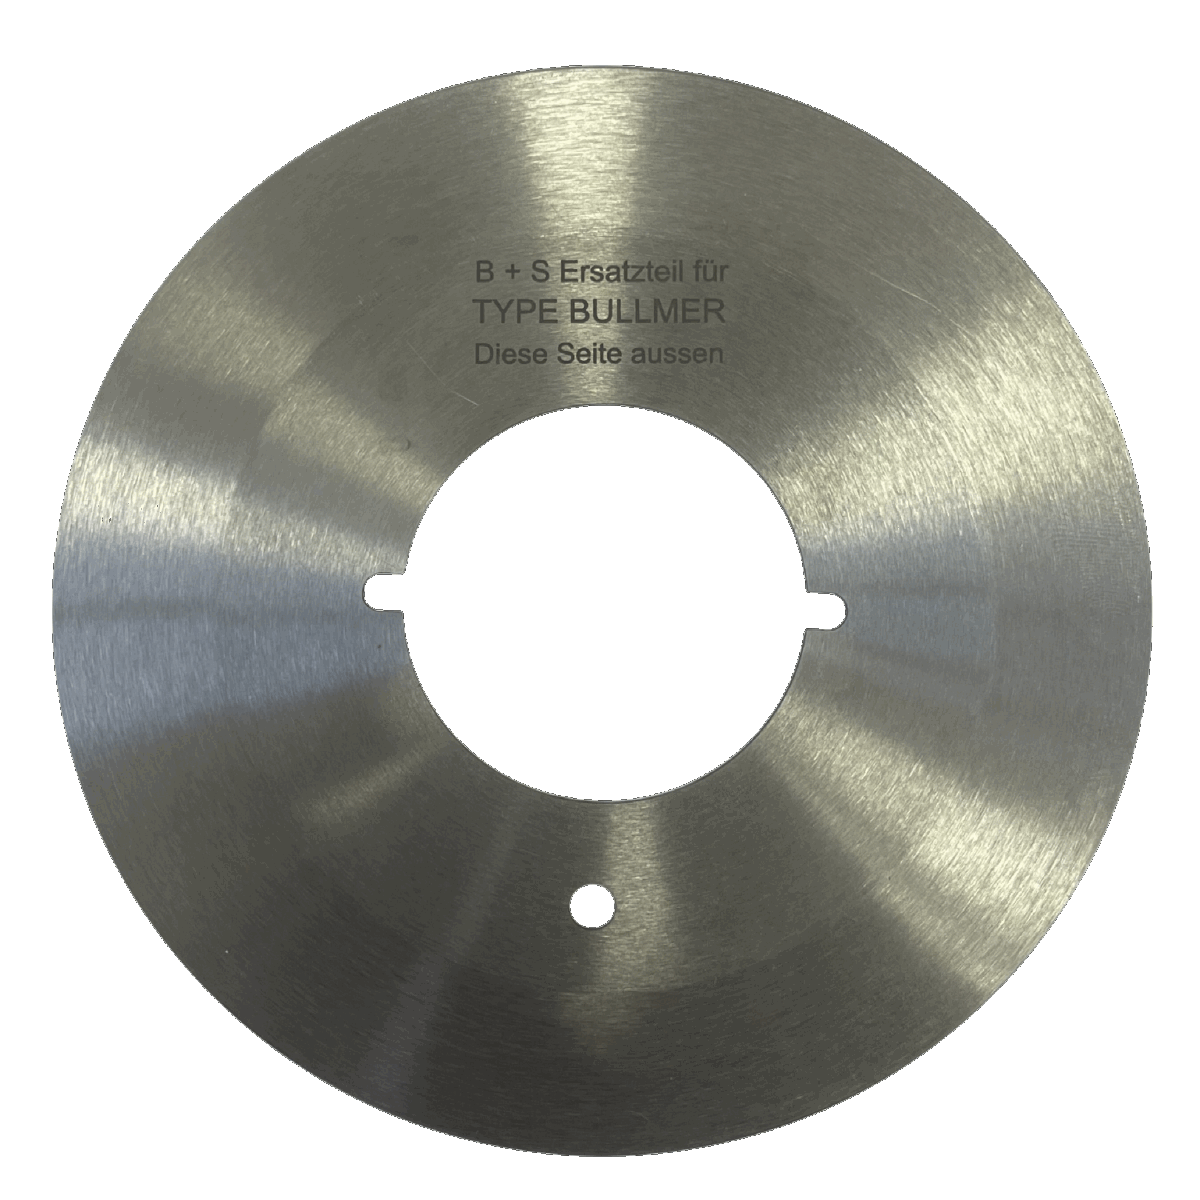 Circular Knife Suitable for Assyst Bullmer and Konsan Spreading machines